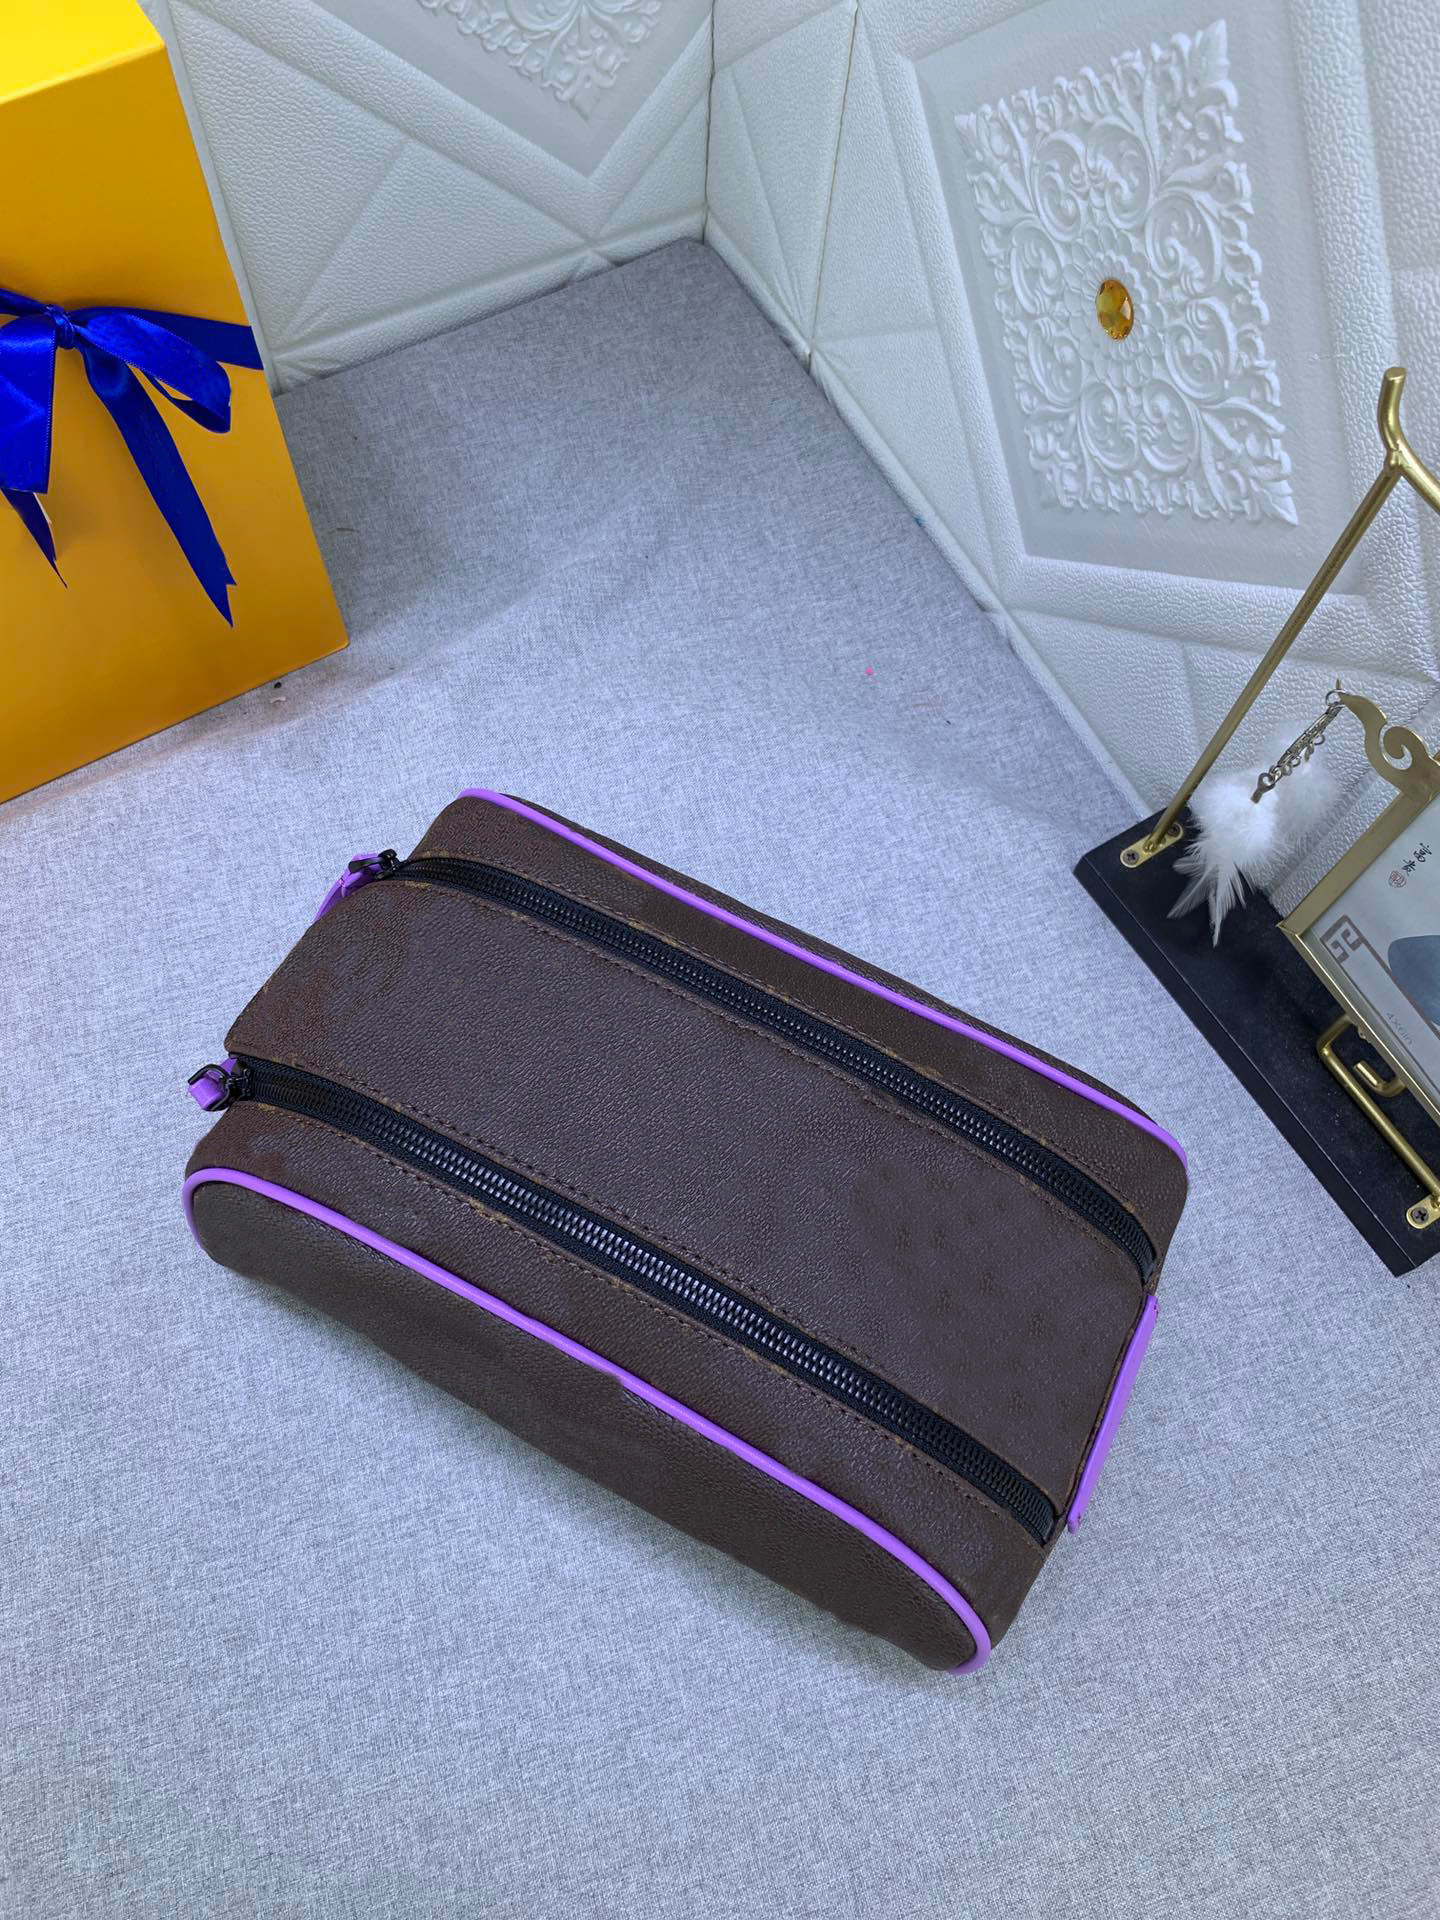 Men travel cosmetic bags organizer women cosmetic cases green purple color new designer makeup bag toiletry pouch289P